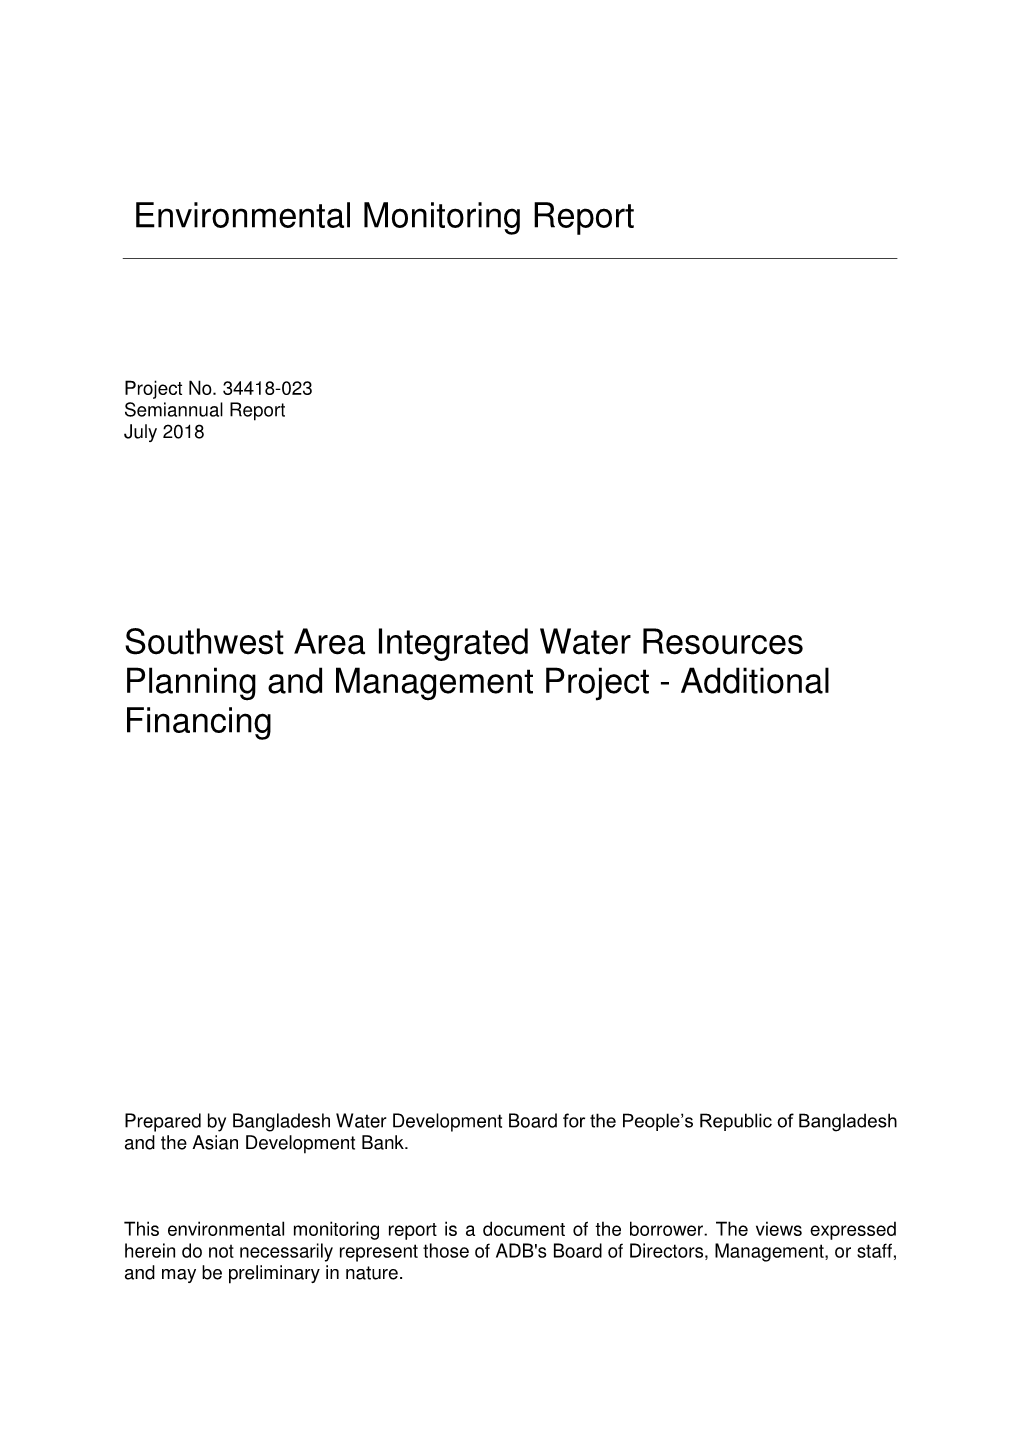 Environmental Monitoring Report Southwest Area Integrated Water